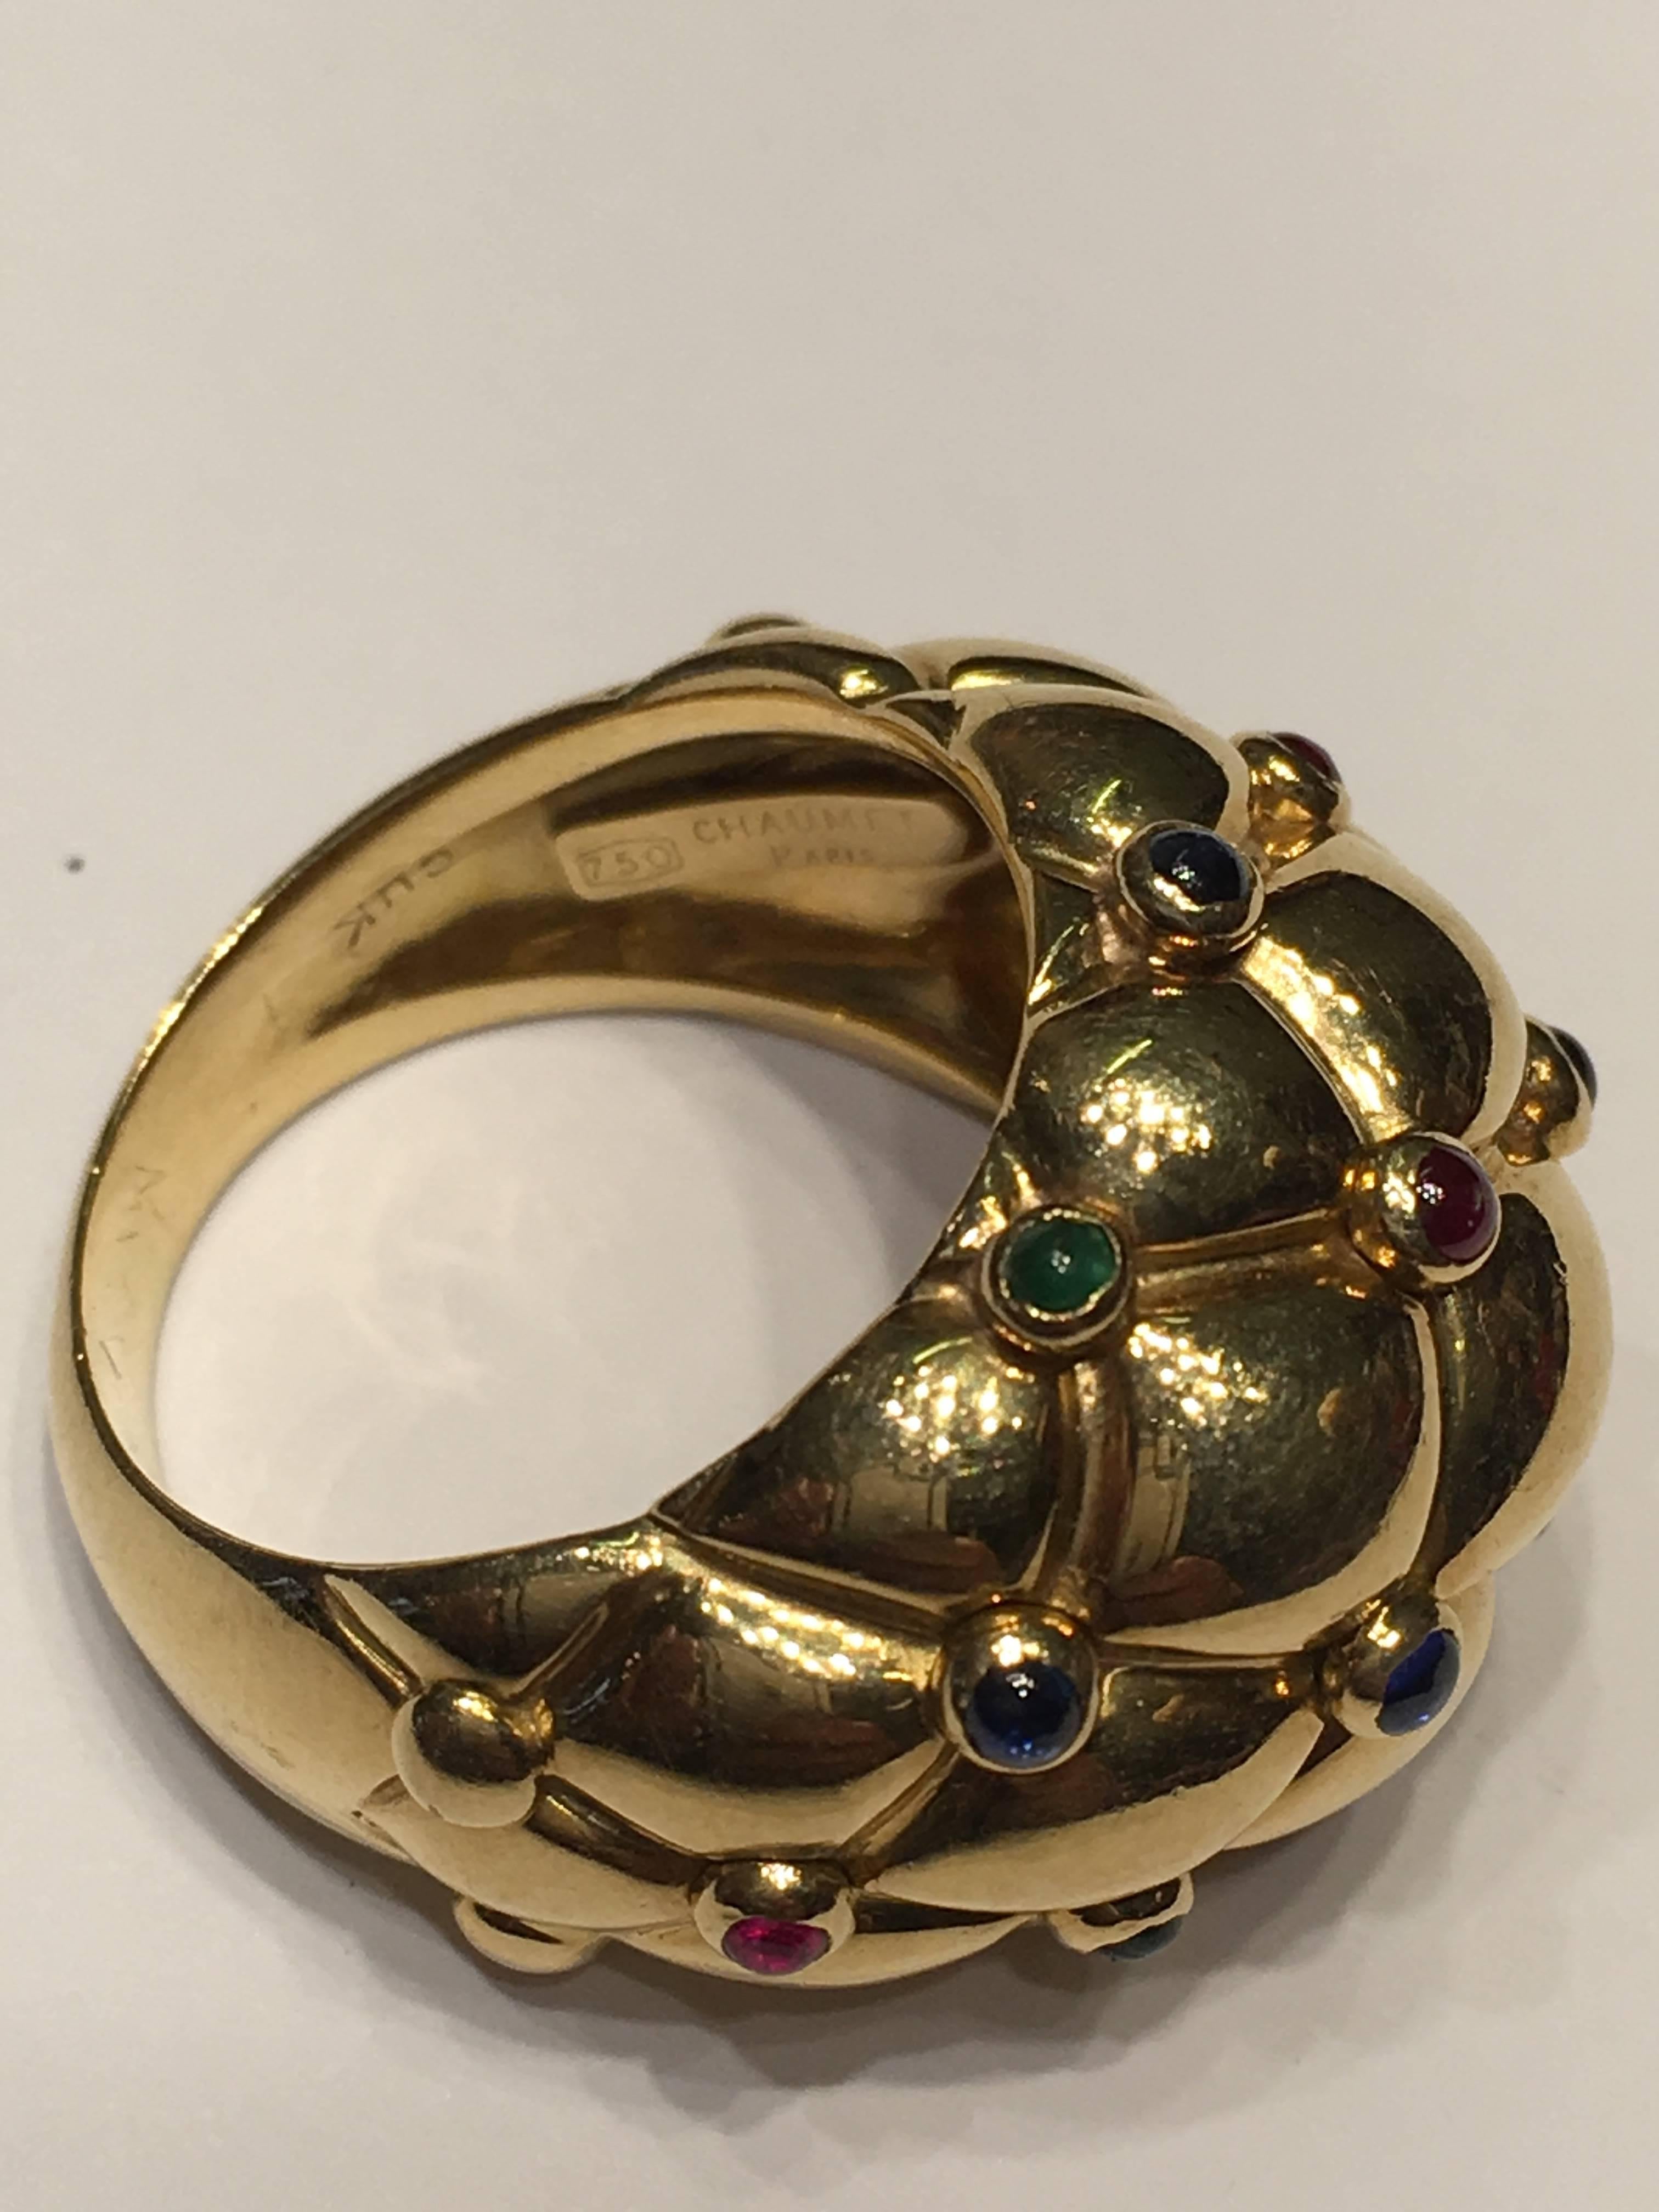 Chaumet Bombay Cushion Ring set with Cabouchon Rubies Sapphires and Emeralds. Set in 18ct Yellow Gold . Fully Signed by Chaumet.
SIZE UK (J)  SIZE (5.1/4) This lovely ring would suit any occasion.
Can be sized free of charge for the